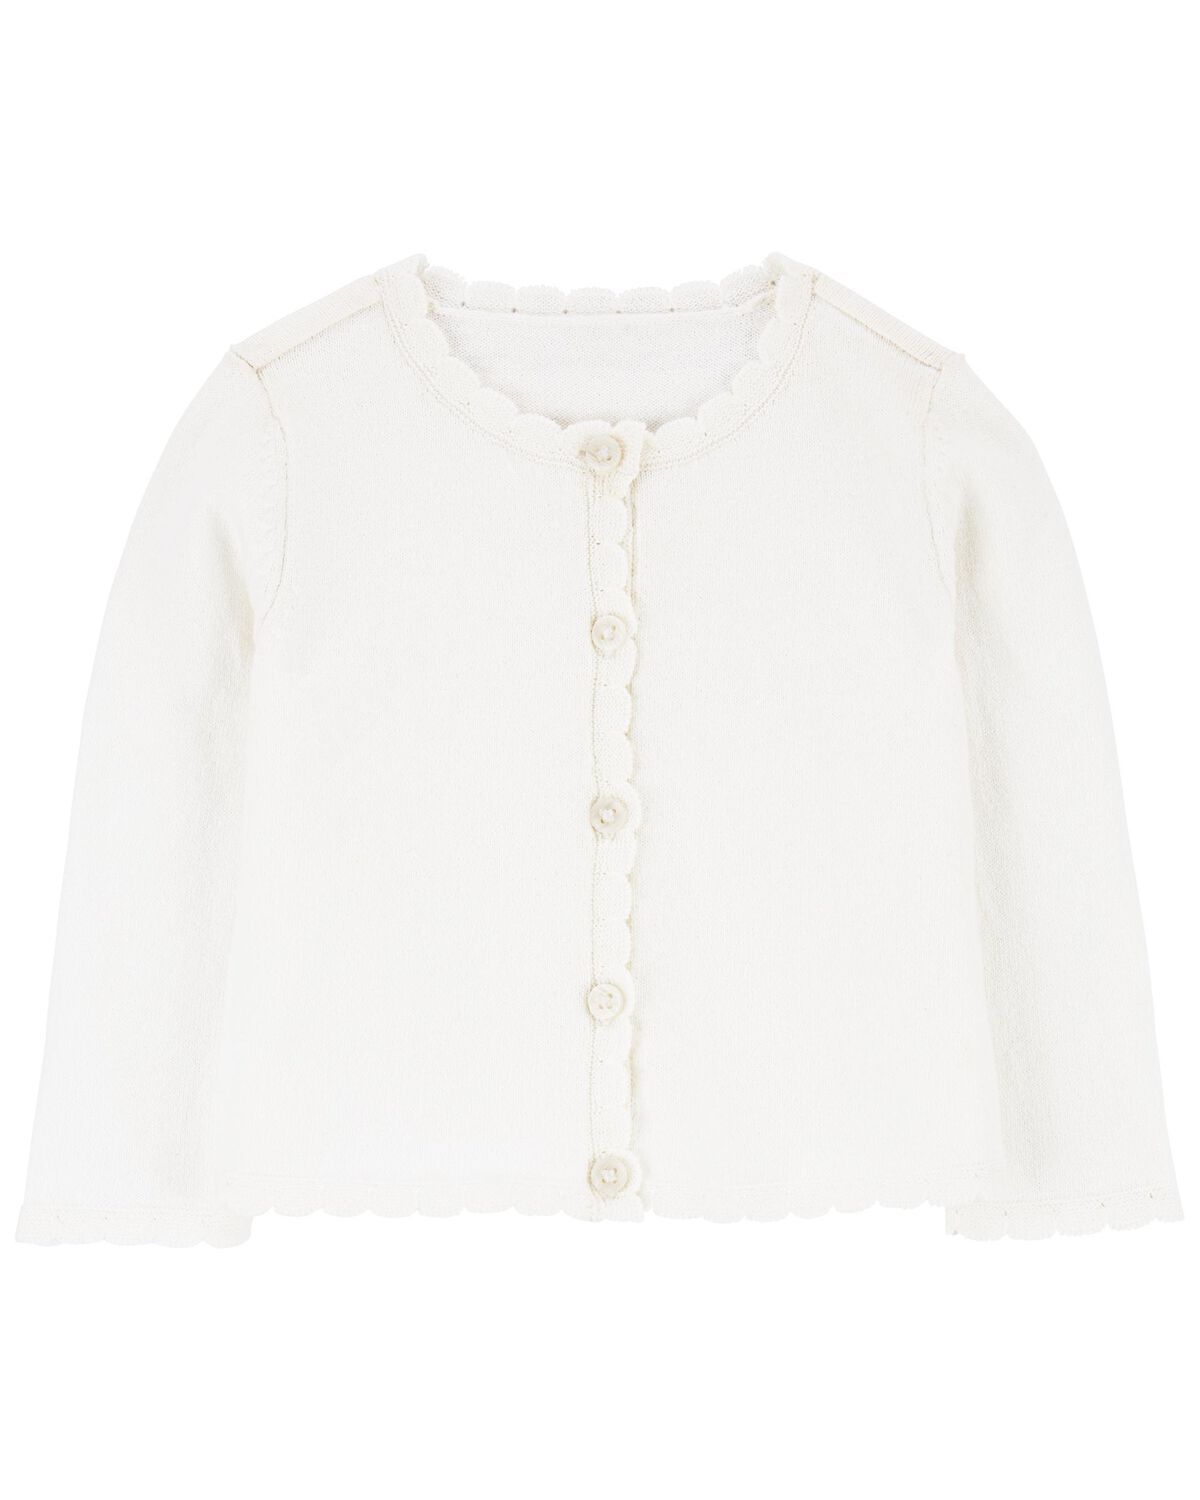 White Baby Button-Up Cardigan | carters.com | Carter's